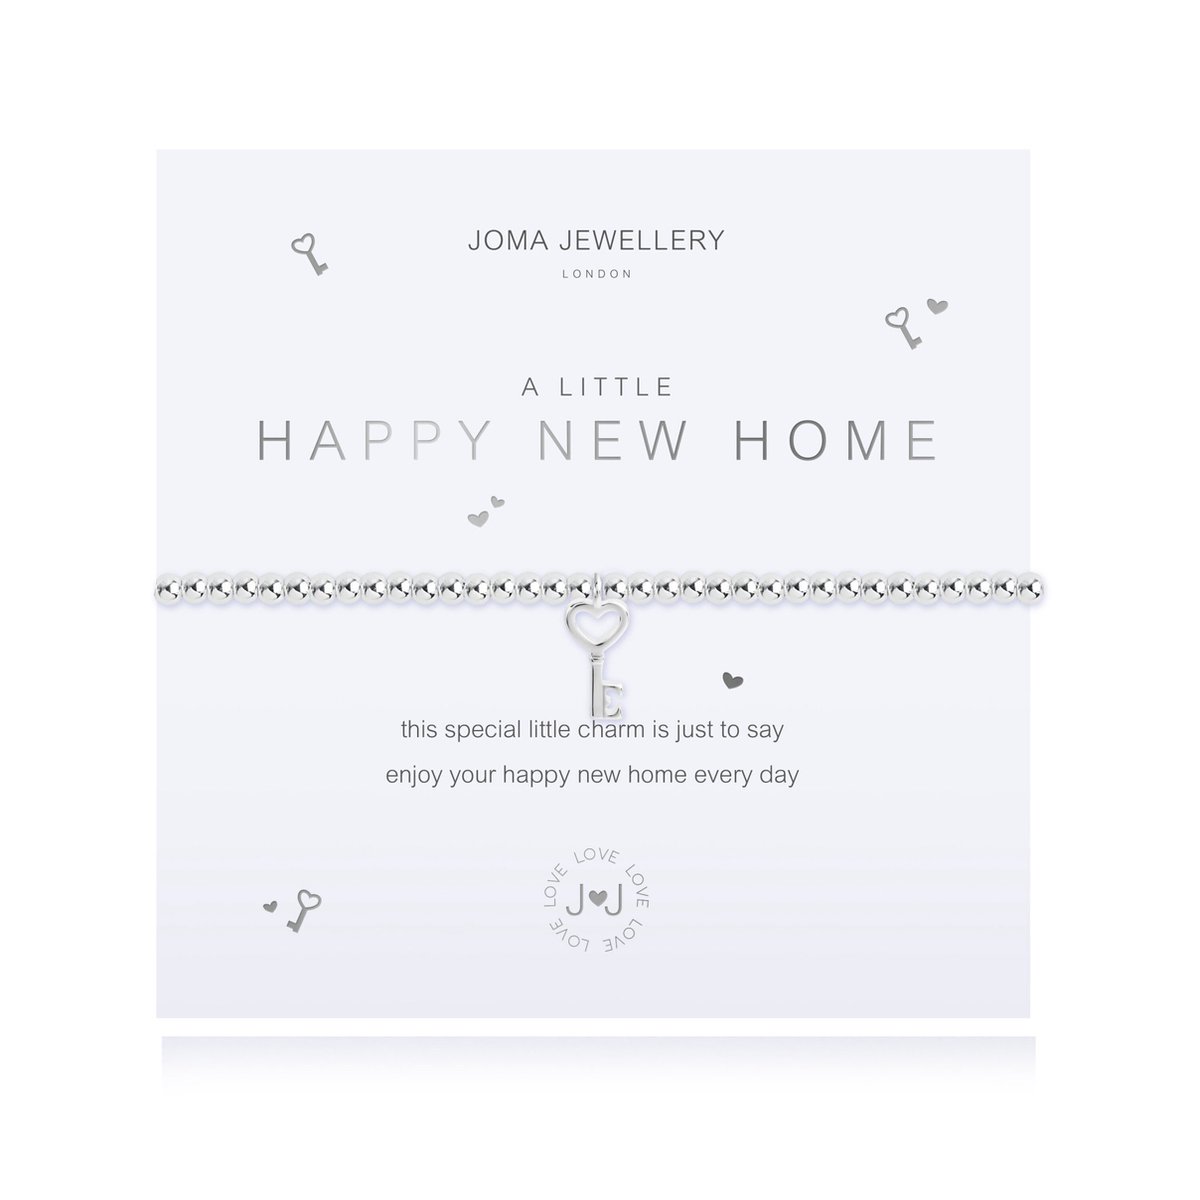 Joma Jewellery - A Little - Happy New Home - Armband